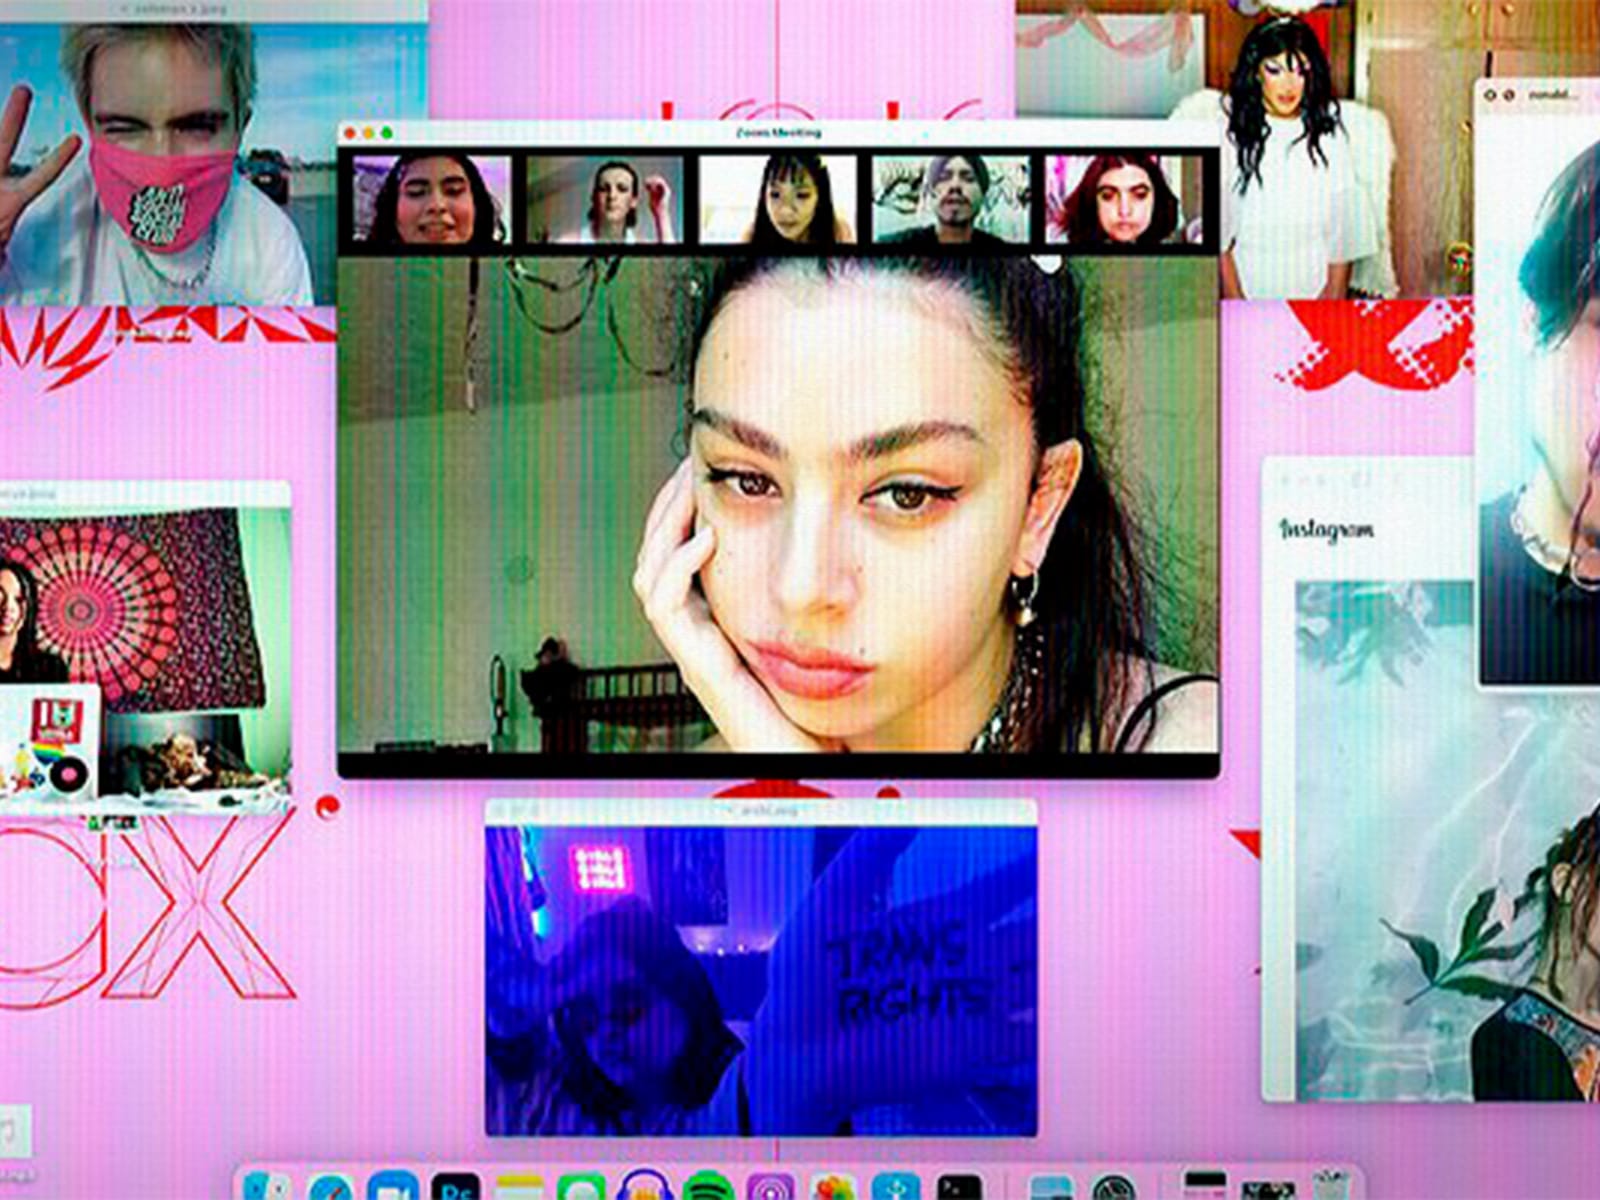 ‘Charli XCX: Alone Together’ will be on Filmin on March 25